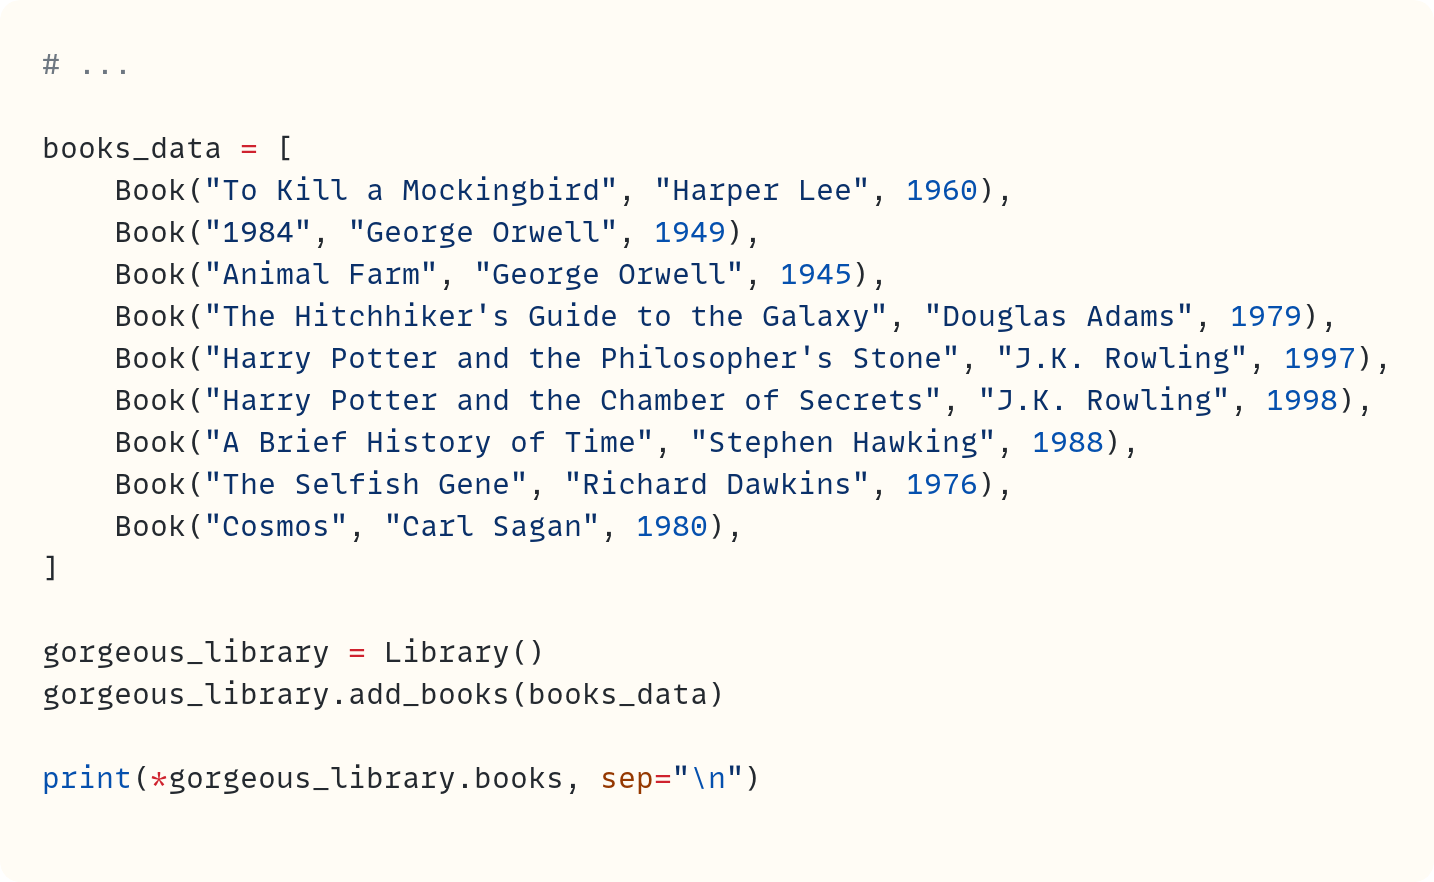 # ...  books_data = [     Book("To Kill a Mockingbird", "Harper Lee", 1960),     Book("1984", "George Orwell", 1949),     Book("Animal Farm", "George Orwell", 1945),     Book("The Hitchhiker's Guide to the Galaxy", "Douglas Adams", 1979),     Book("Harry Potter and the Philosopher's Stone", "J.K. Rowling", 1997),     Book("Harry Potter and the Chamber of Secrets", "J.K. Rowling", 1998),     Book("A Brief History of Time", "Stephen Hawking", 1988),     Book("The Selfish Gene", "Richard Dawkins", 1976),     Book("Cosmos", "Carl Sagan", 1980), ]  gorgeous_library = Library() gorgeous_library.add_books(books_data)  print(*gorgeous_library.books, sep="\n")